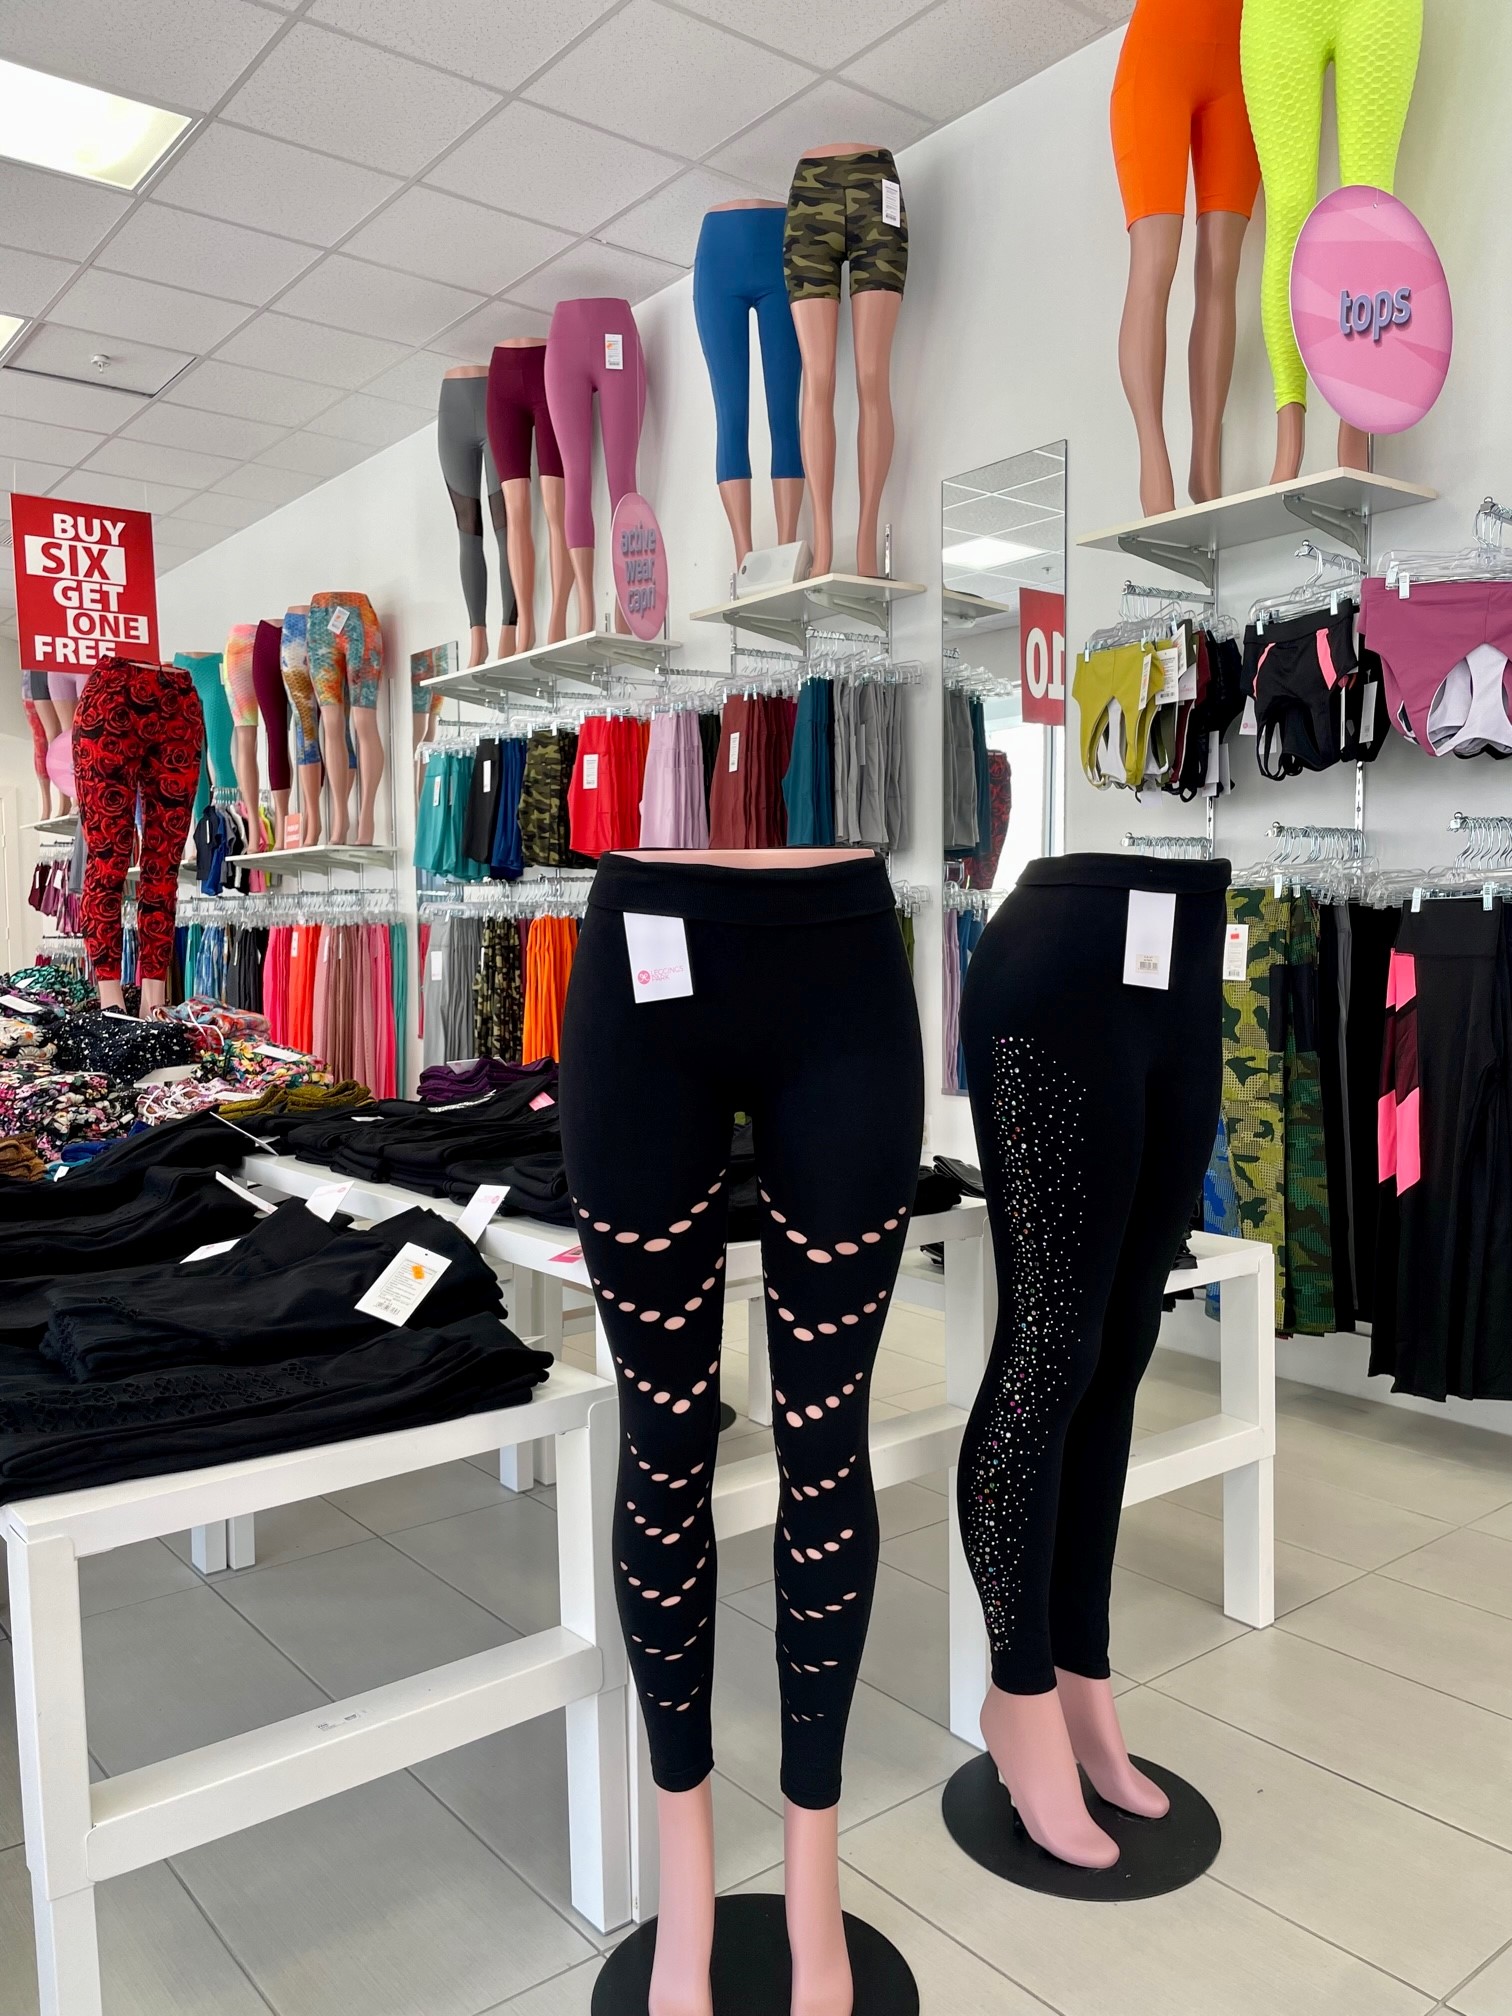 Leggings Park opens at Miromar Outlets - Gulfshore Business